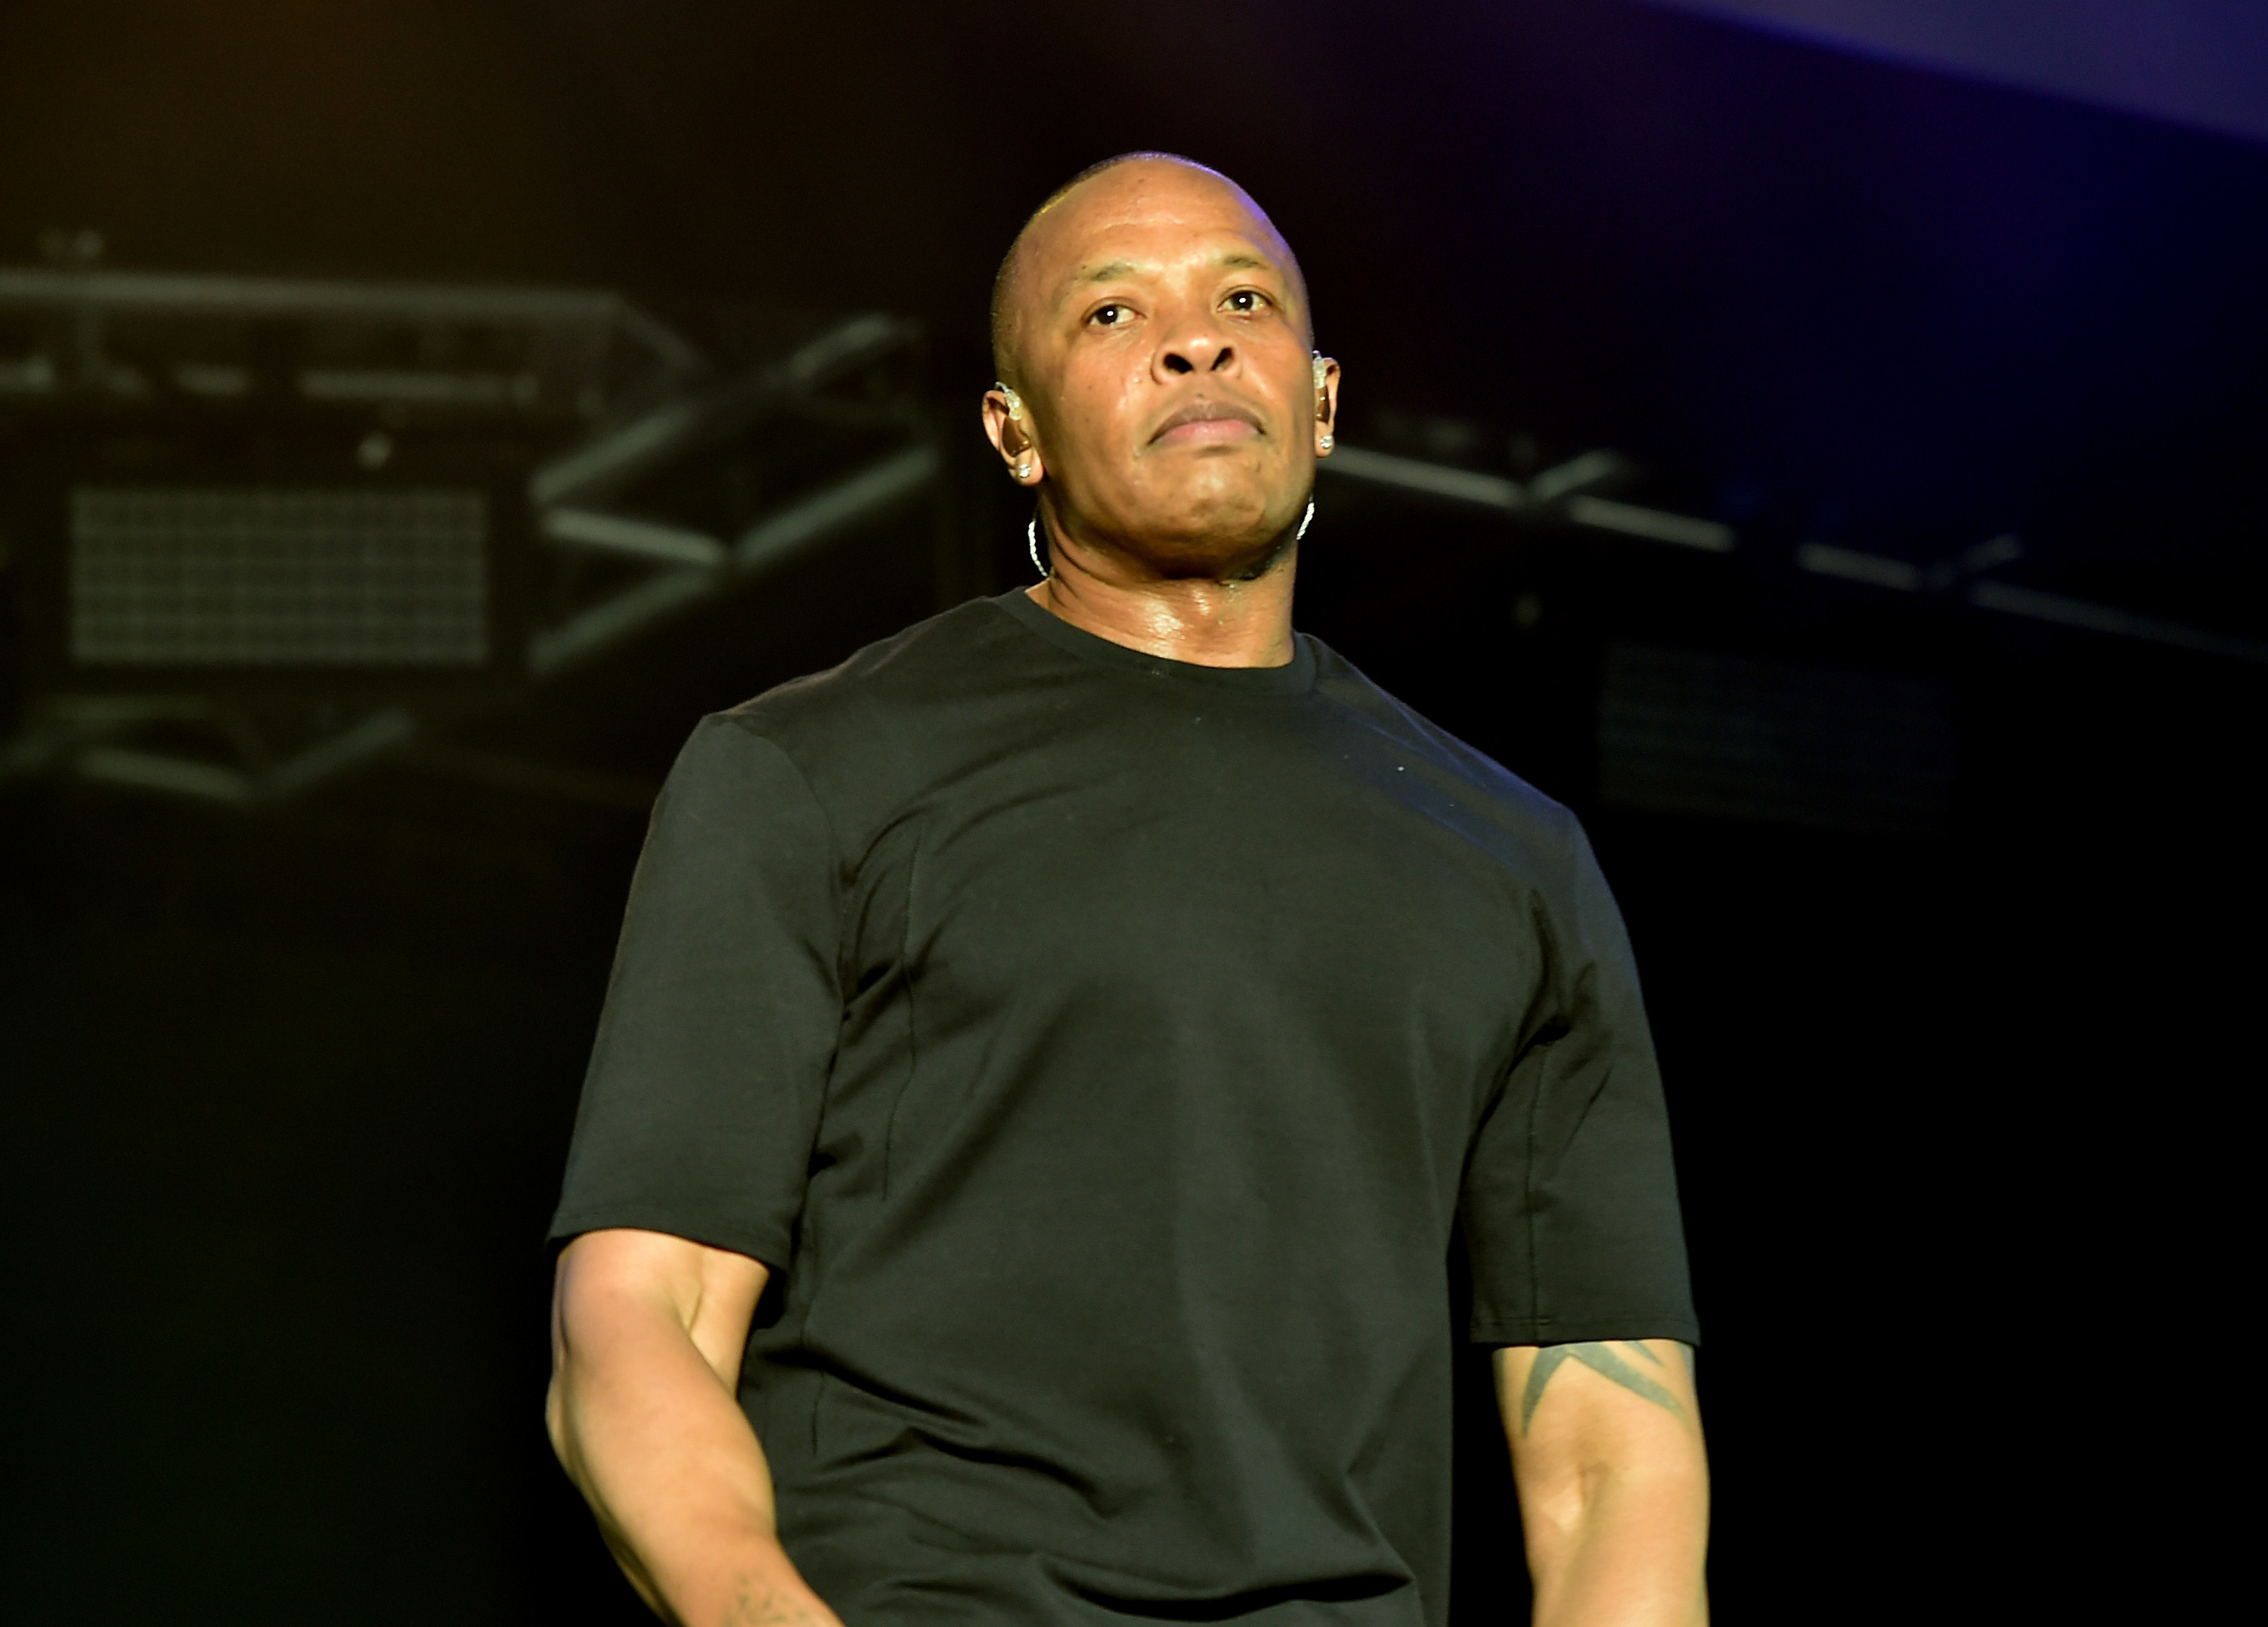 Recording artist Dr. Dre  performs onstage during day 2 of the 2016 Coachella Valley Music &amp; Arts Festival Weekend 2 at the Empire Polo Club on April 23, 2016 in Indio, California. (Kevin Winter—Getty Images)